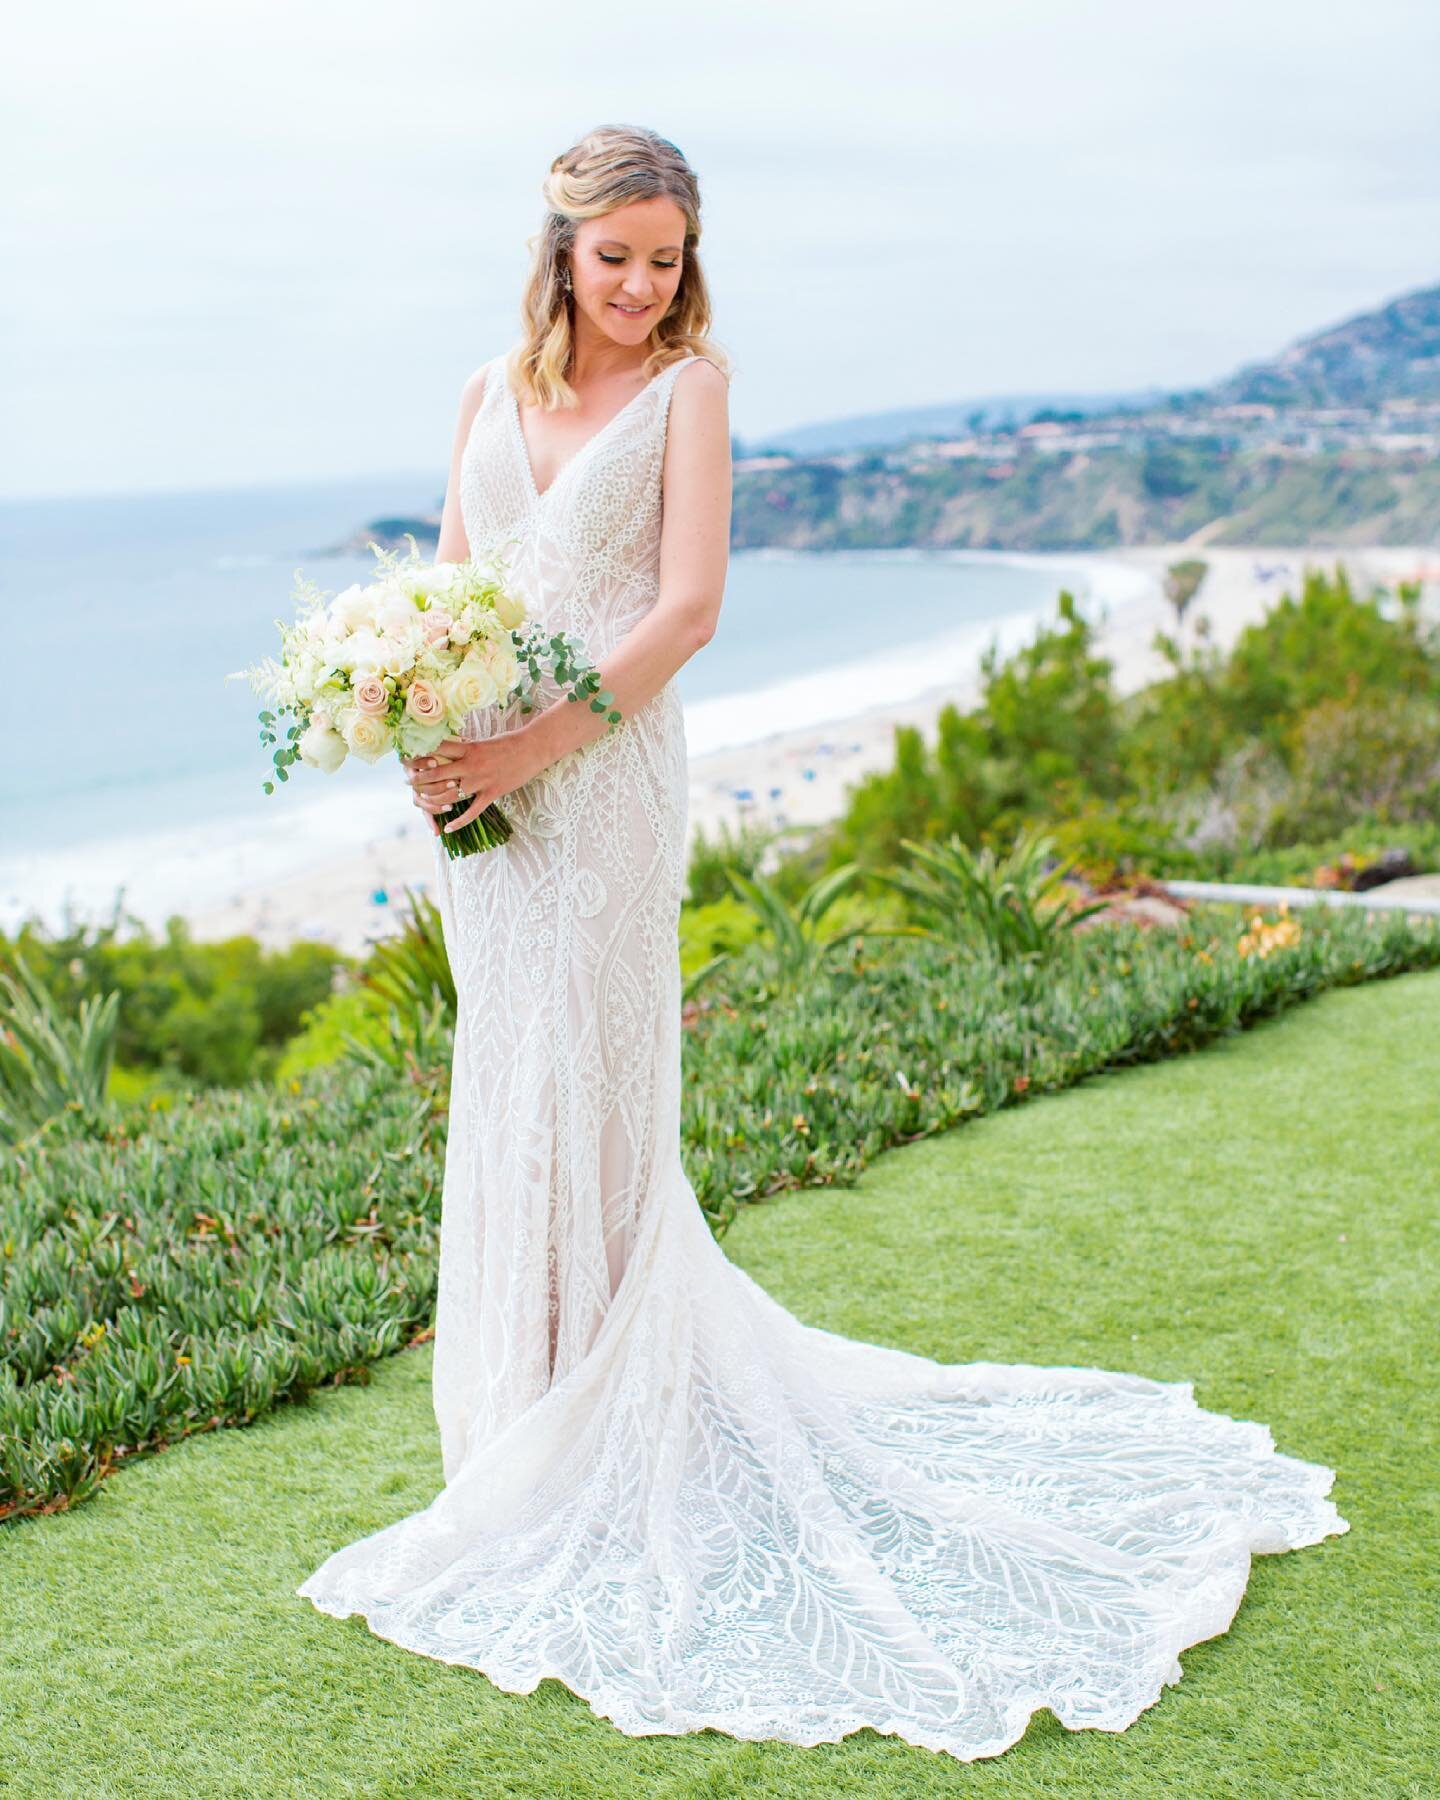 Loved photographing our bride at the @ritzcarltonlagunaniguel coastal line with such amazing views of the mountains and beach front!